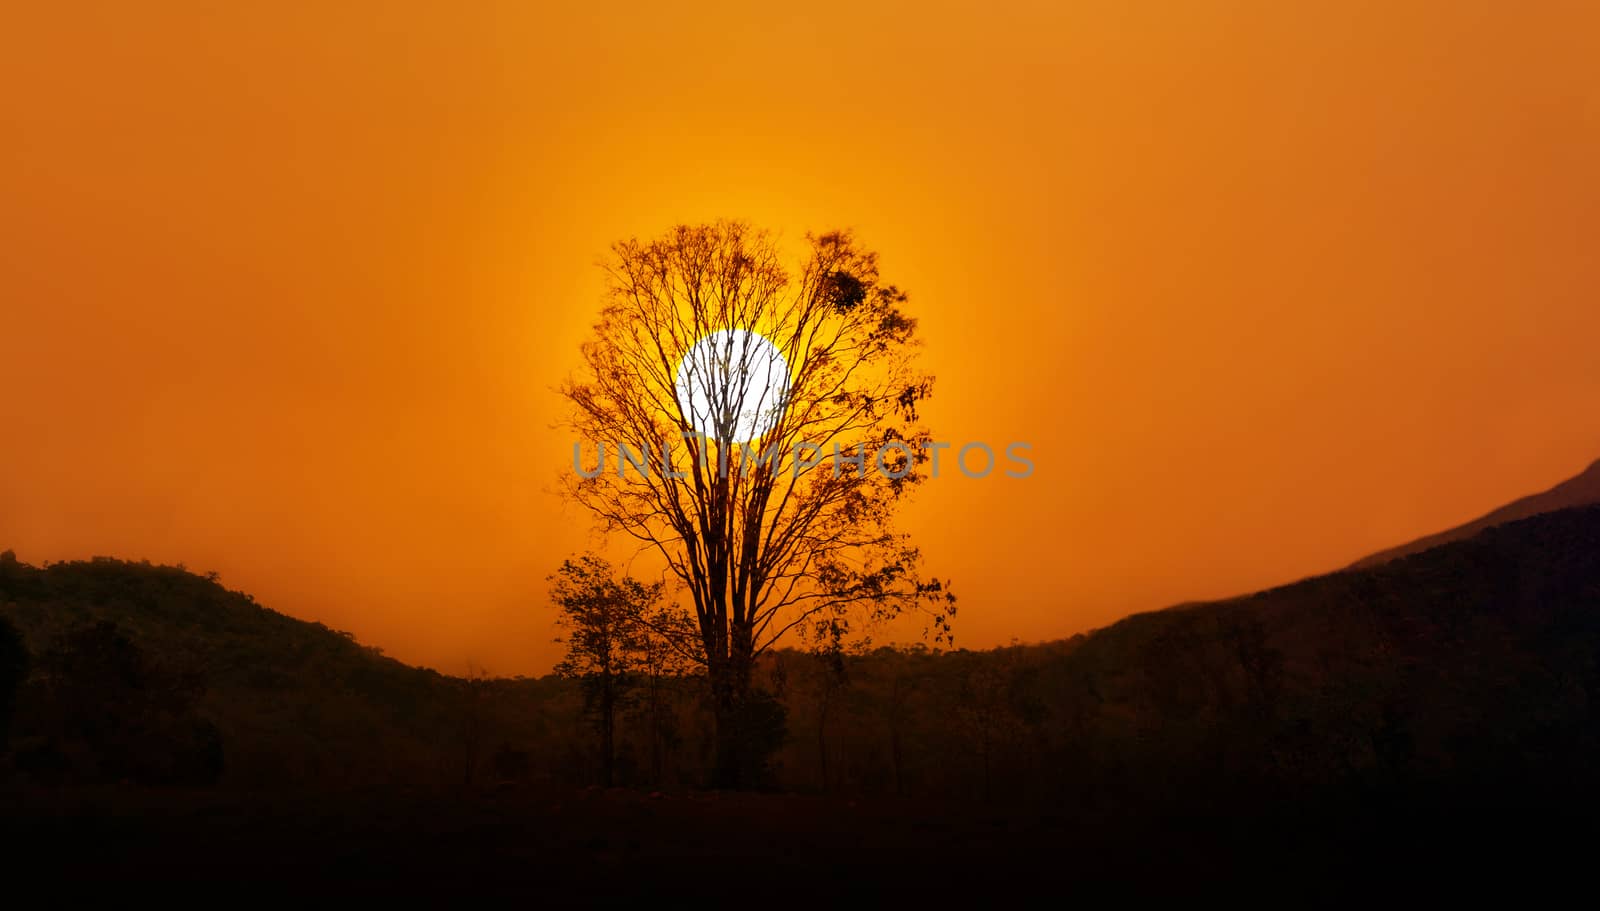 Silhouette black shadow tree shape and hill with big sun, sunset in twilight with tree silhouette at the hill